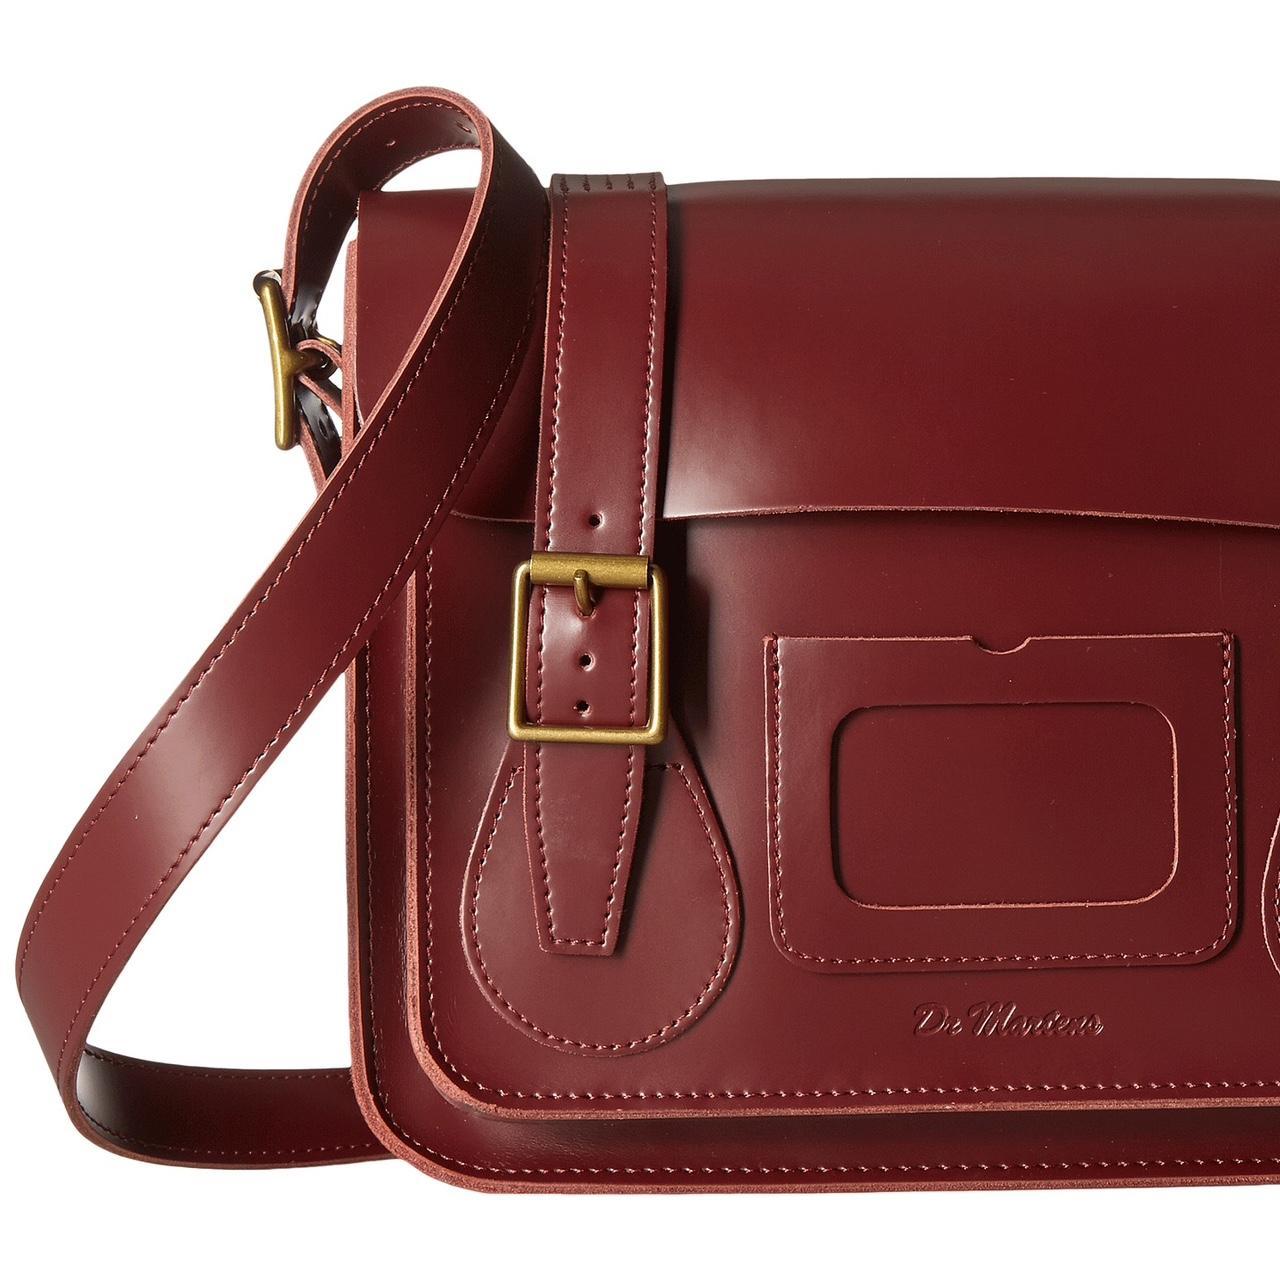 Dr. Martens Women's Burgundy and Red Bag (2)